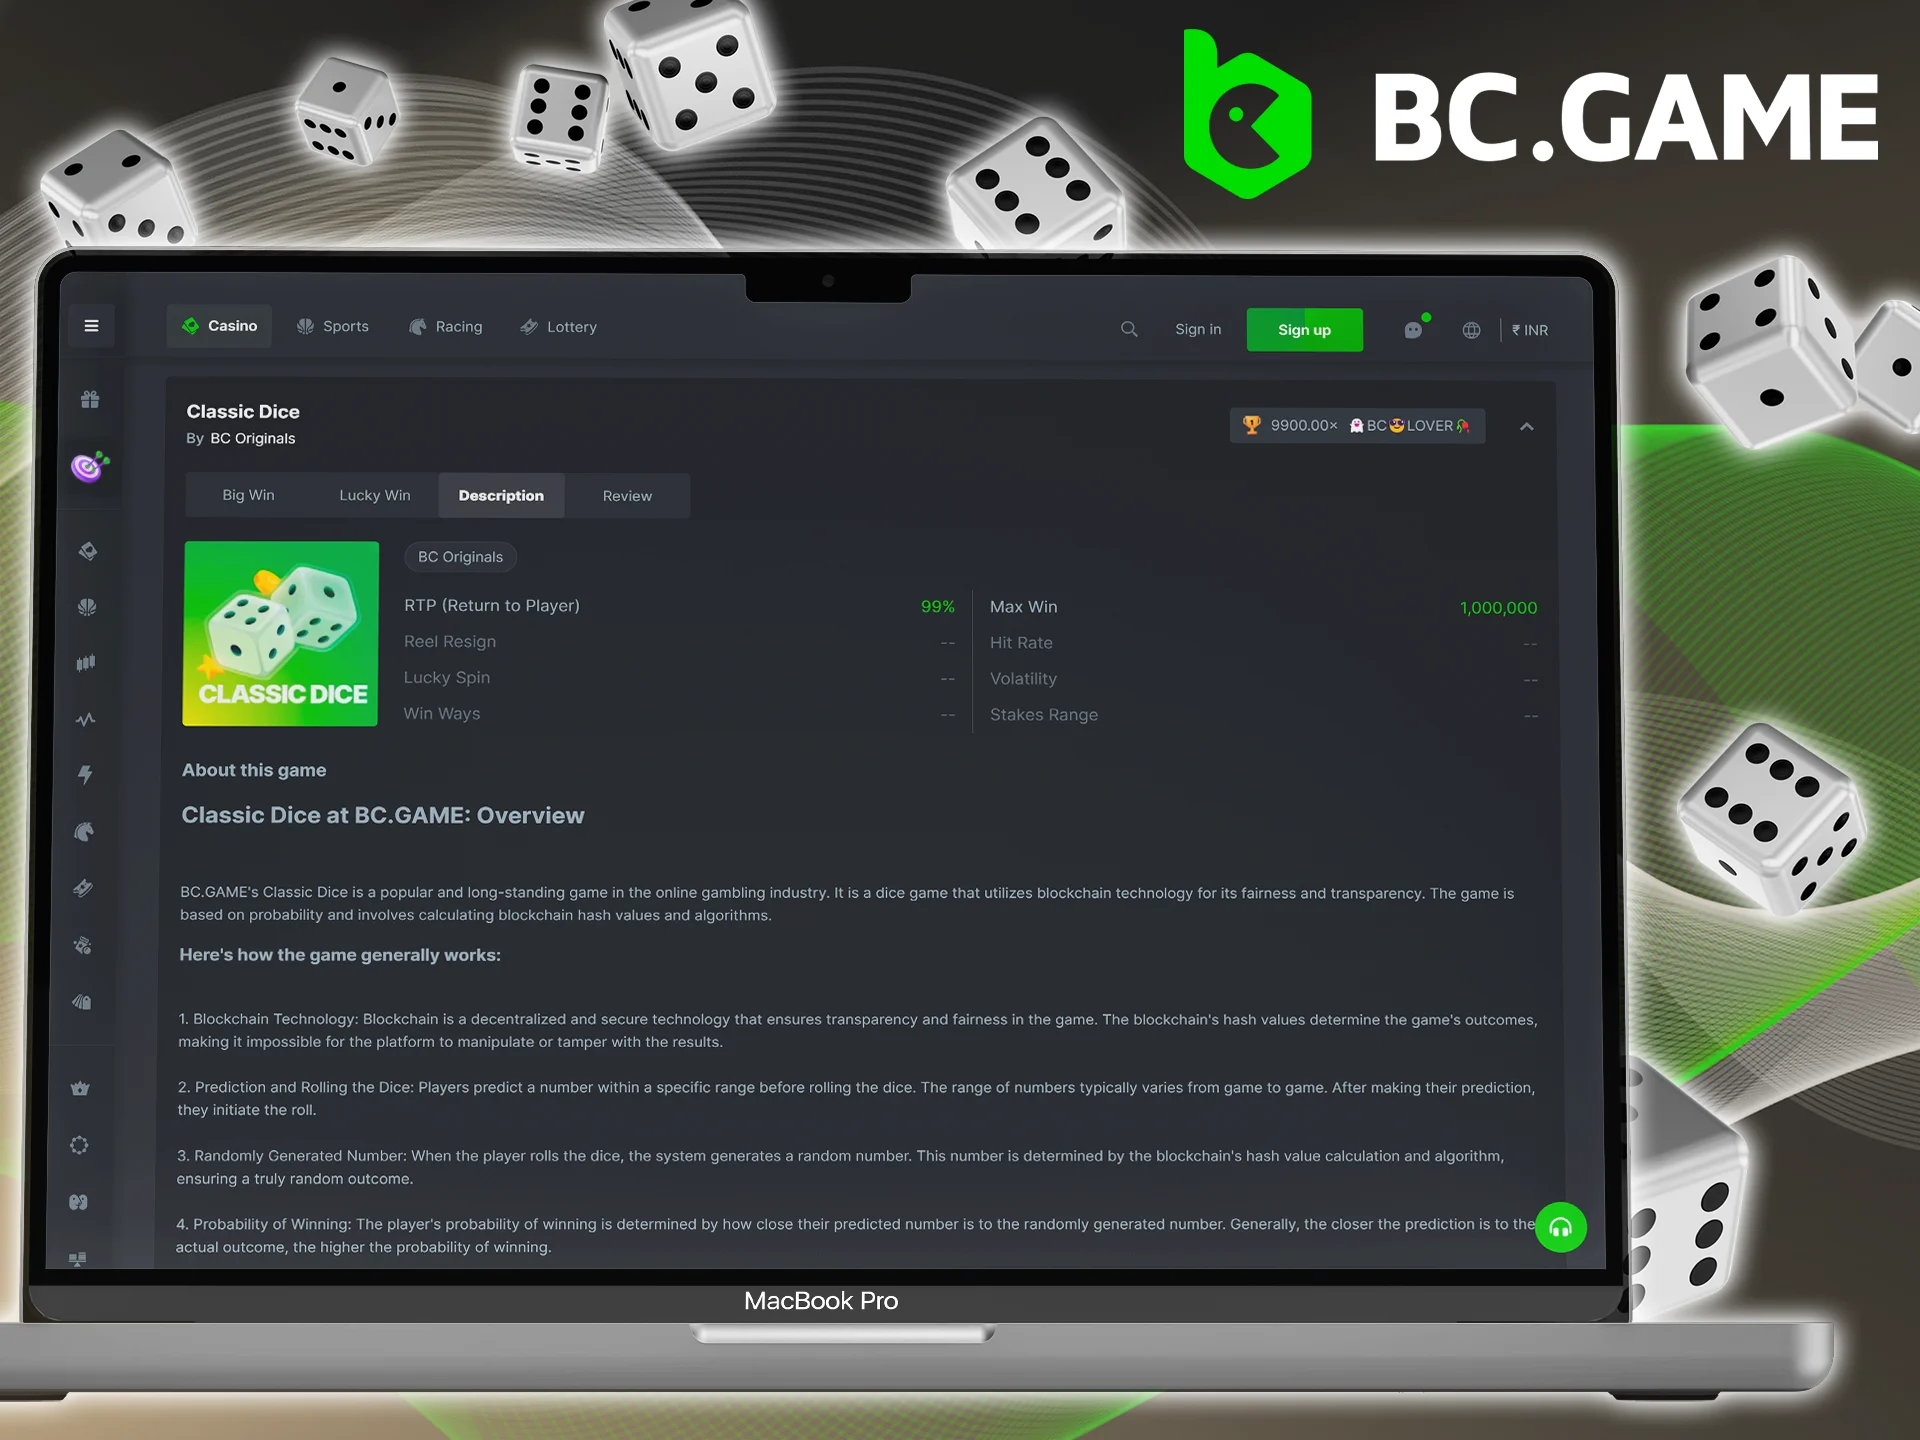 Find out the details of Classic Dice by BC Game and start playing.